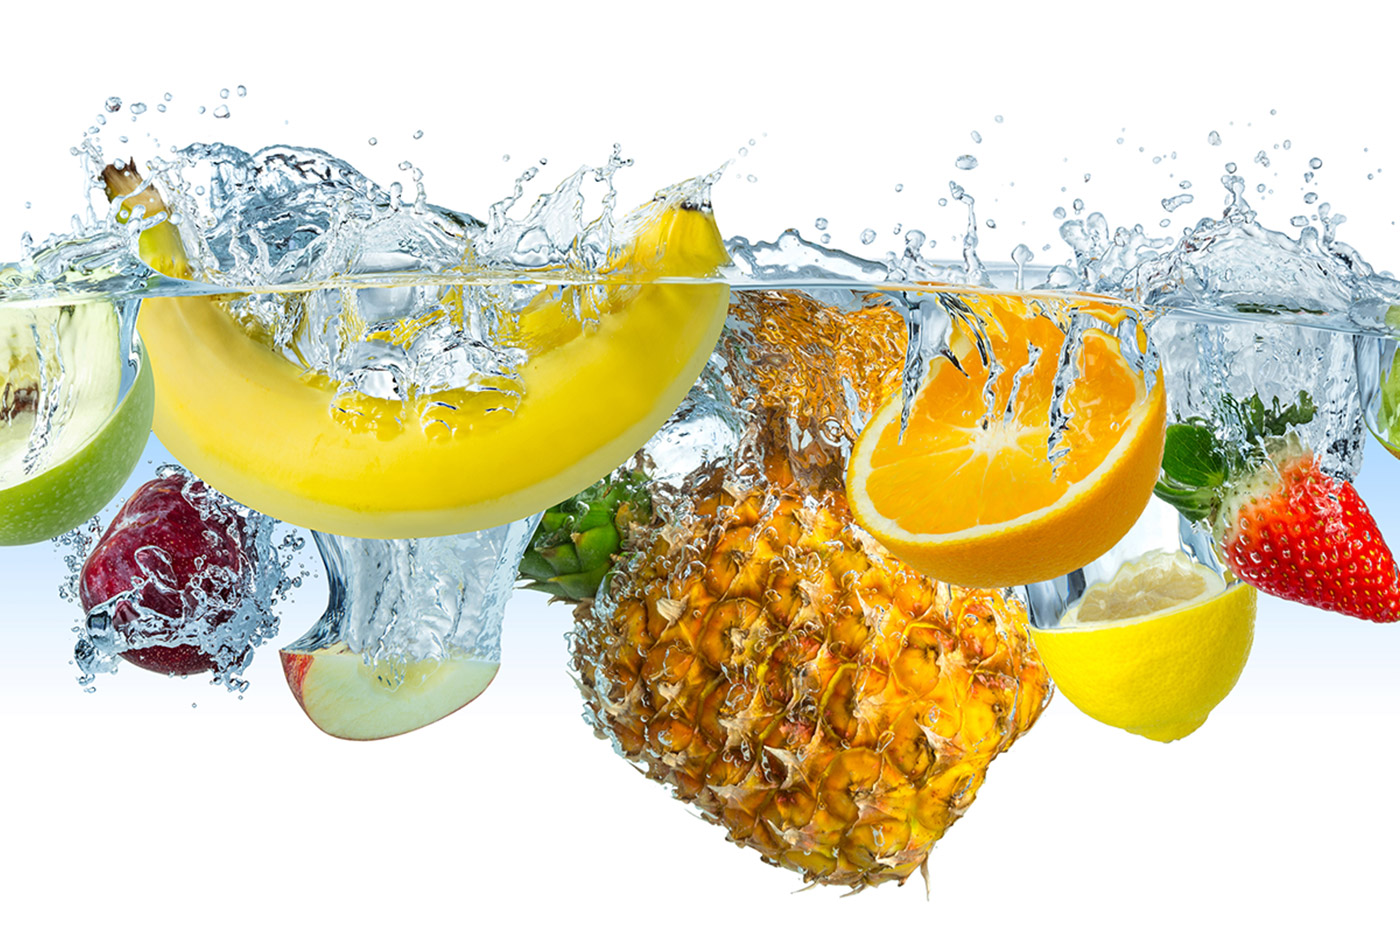 Various fruits splashing into a body of water.